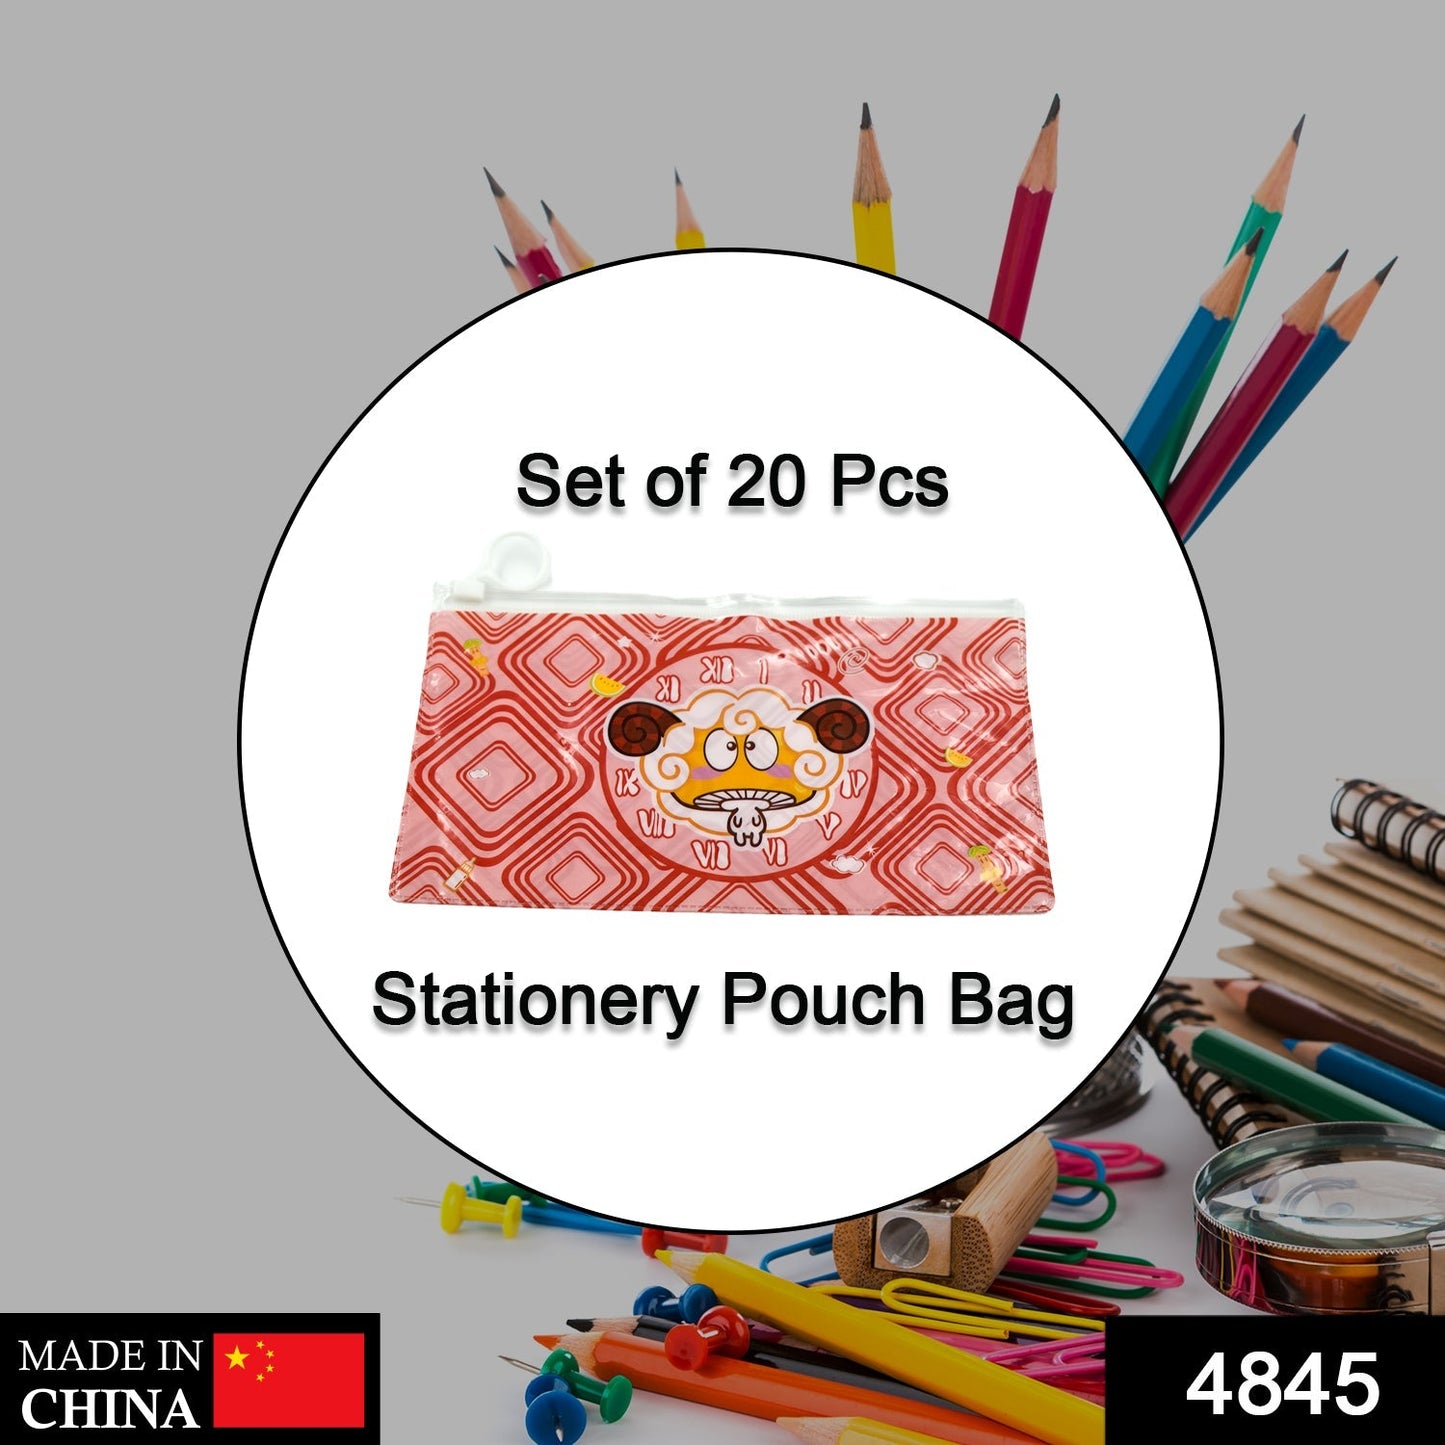 4845 20 Pc Red Printed Pouch For Carrying Stationary Stuffs And All By The Students.